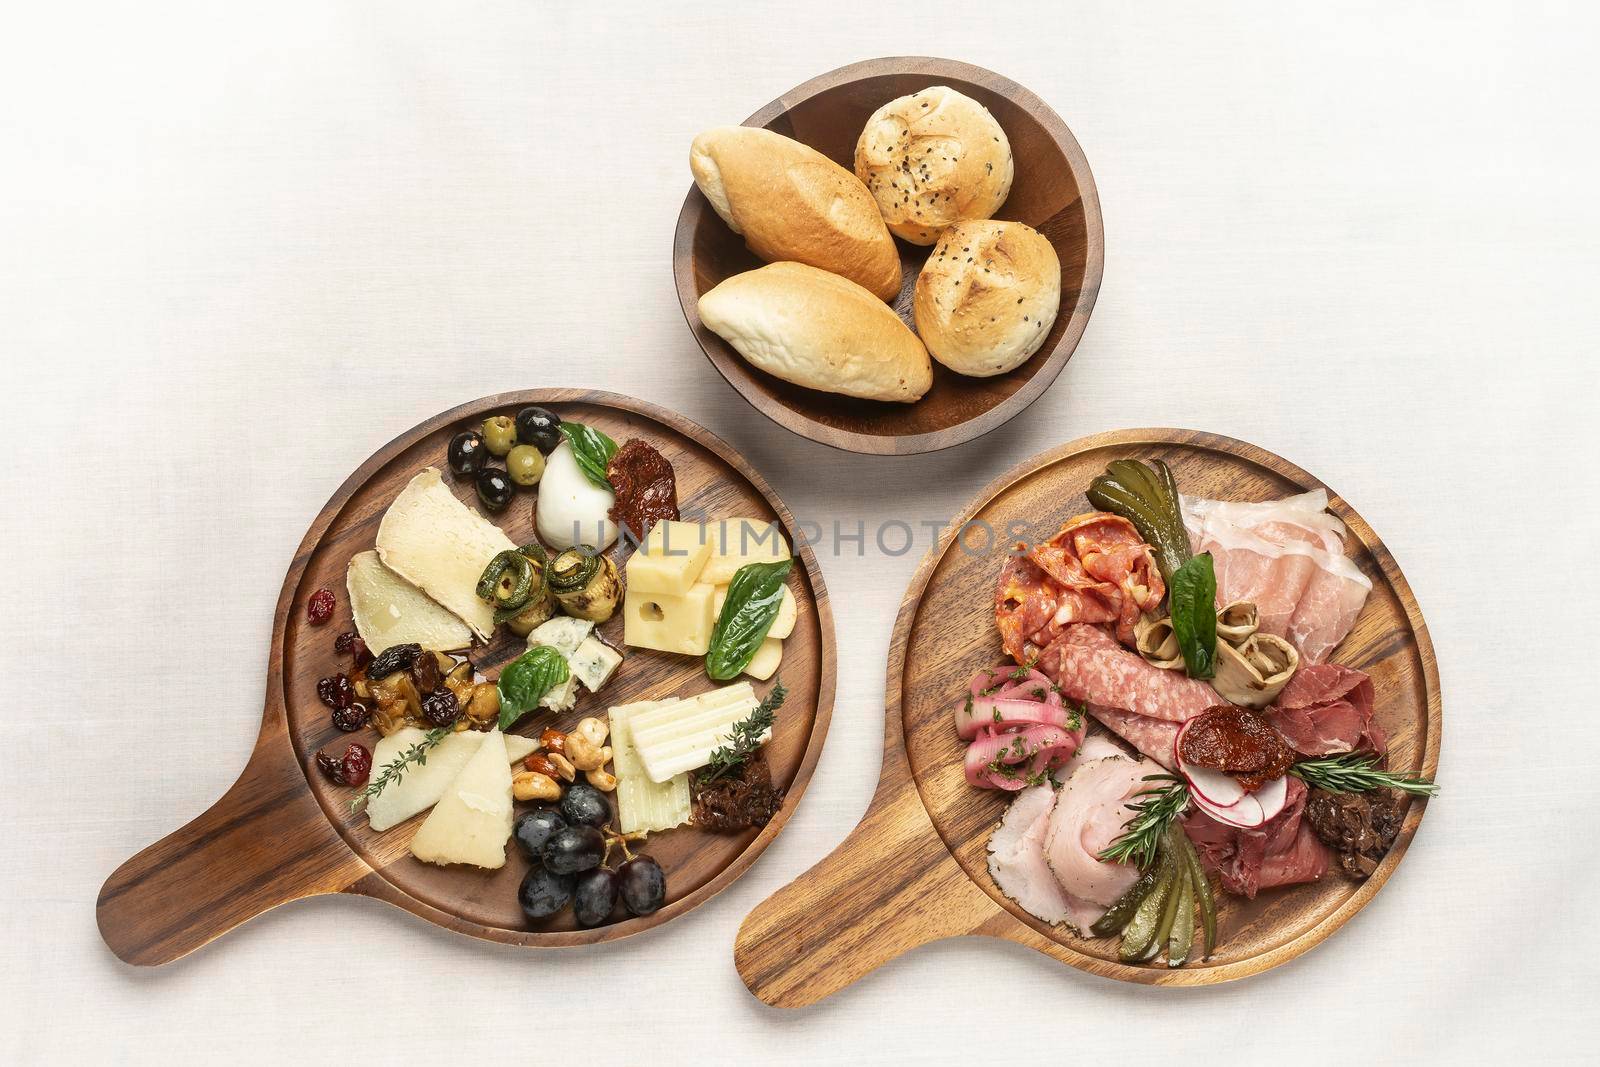 antipasto gourmet charcuterie and cheese cold cuts on wood board by jackmalipan